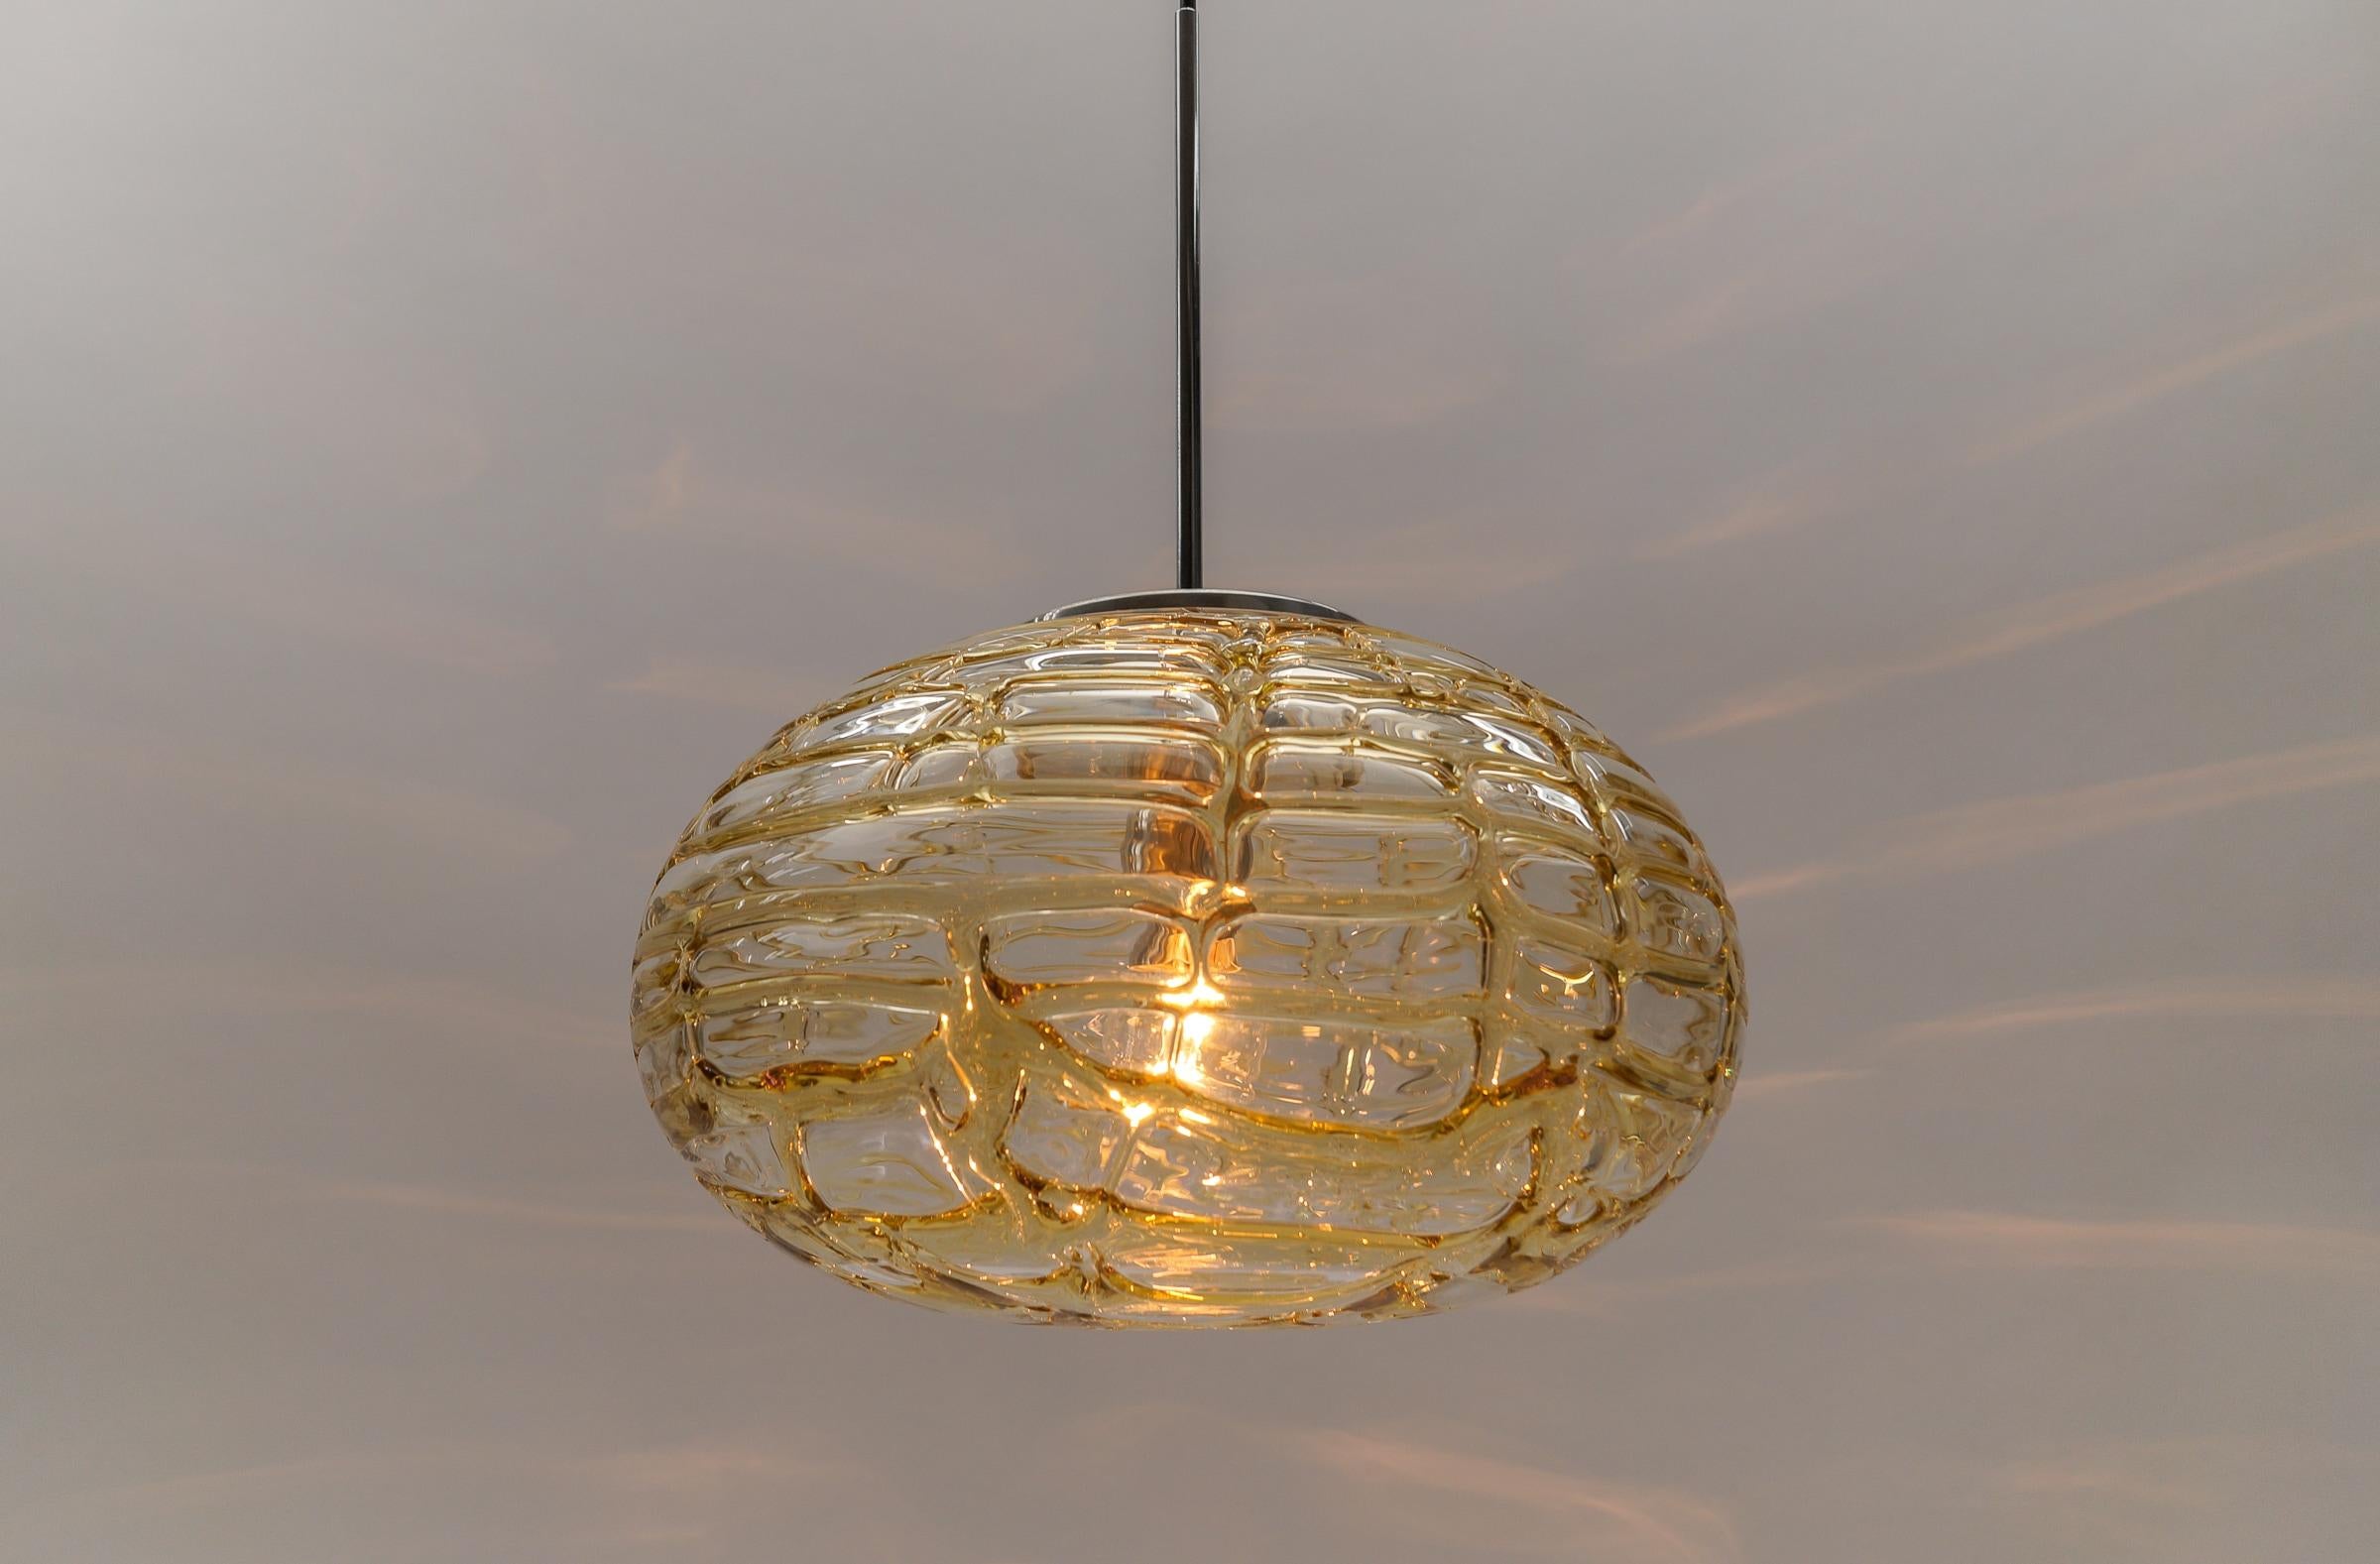 Yellow Oval Murano Glass Ball Pendant Lamp by Doria, 1960s Germany   For Sale 3